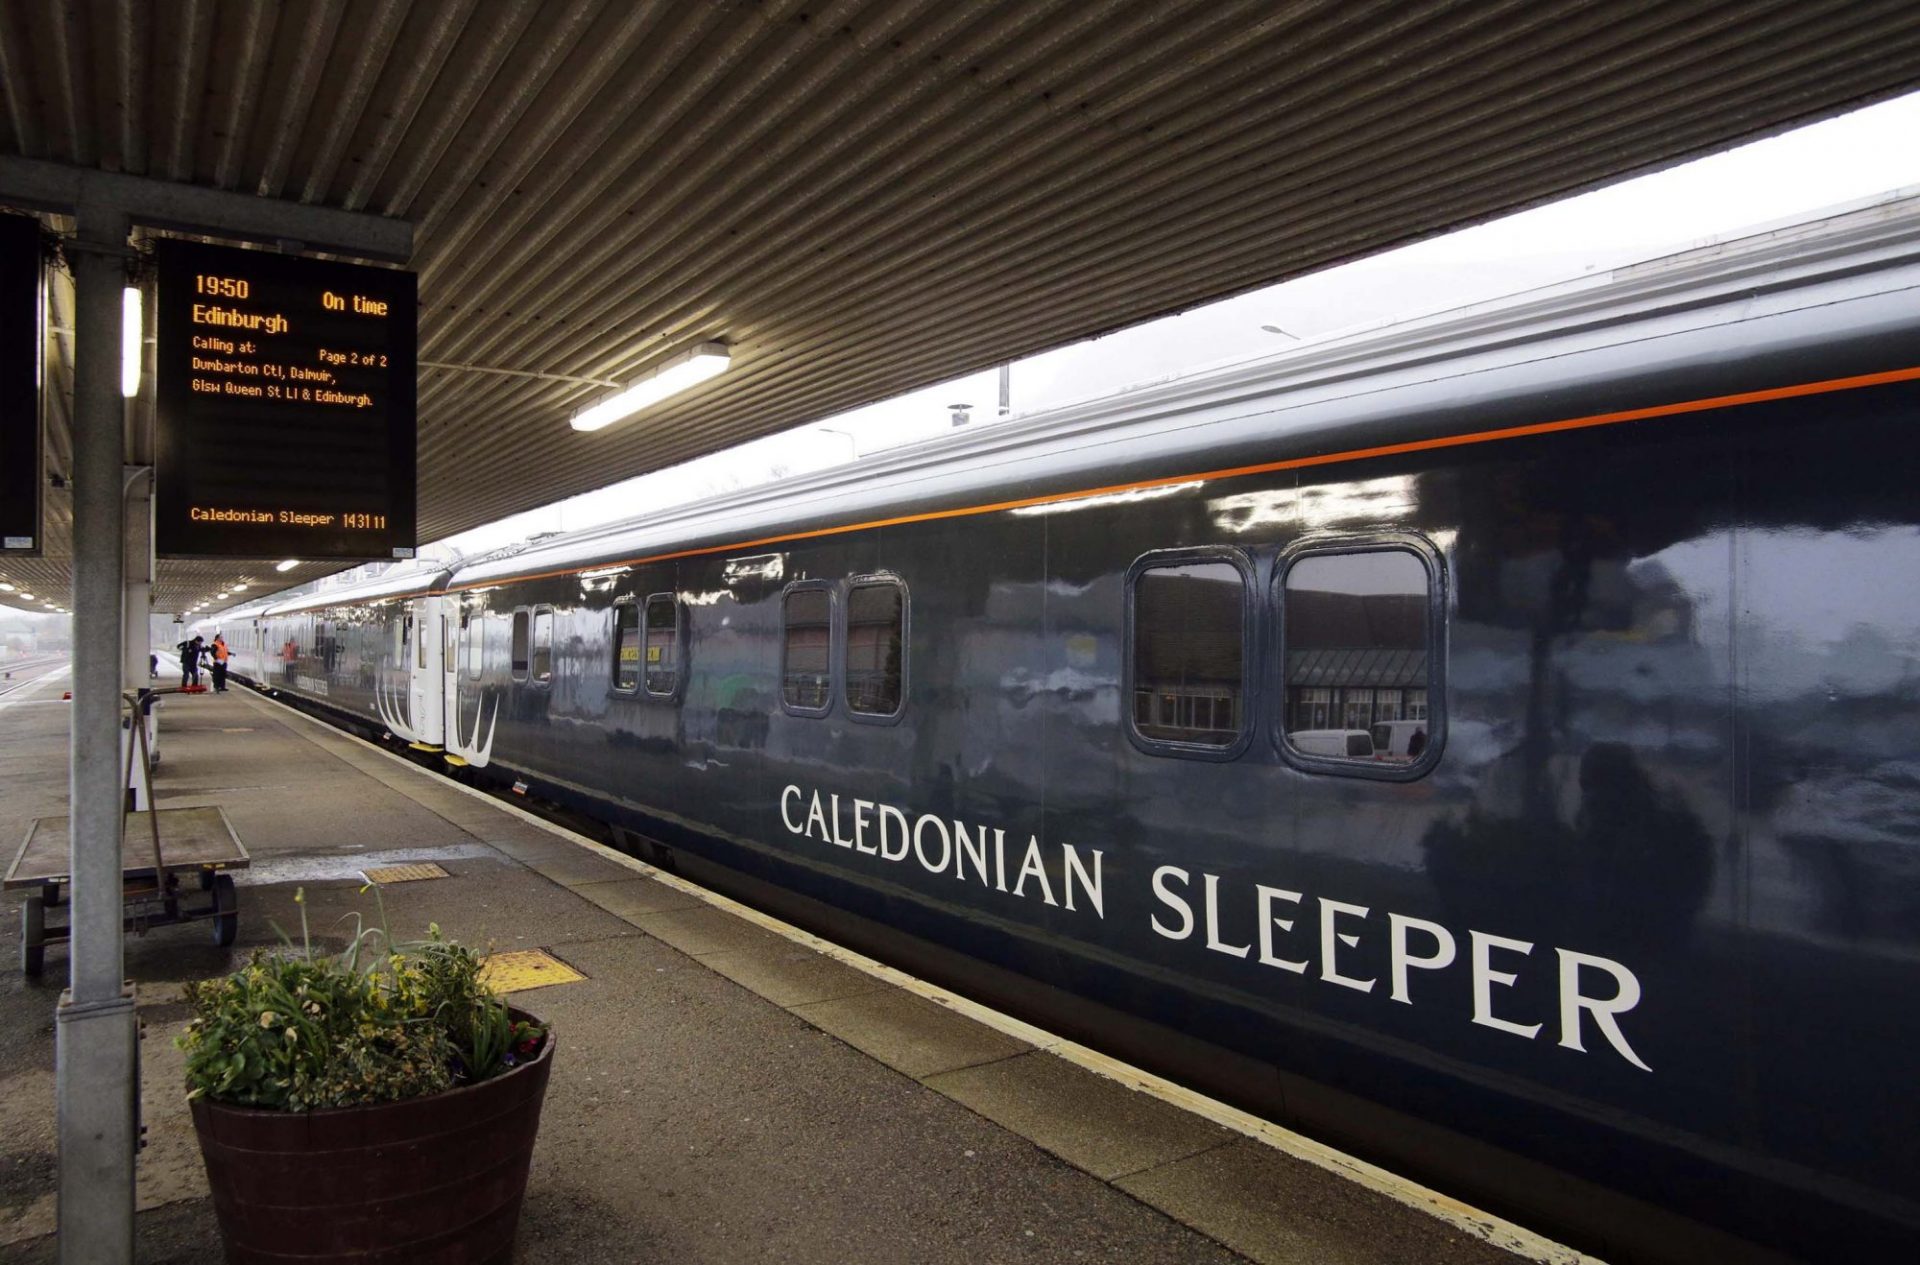 New Caledonian Sleeper carriages to enter passenger service in October